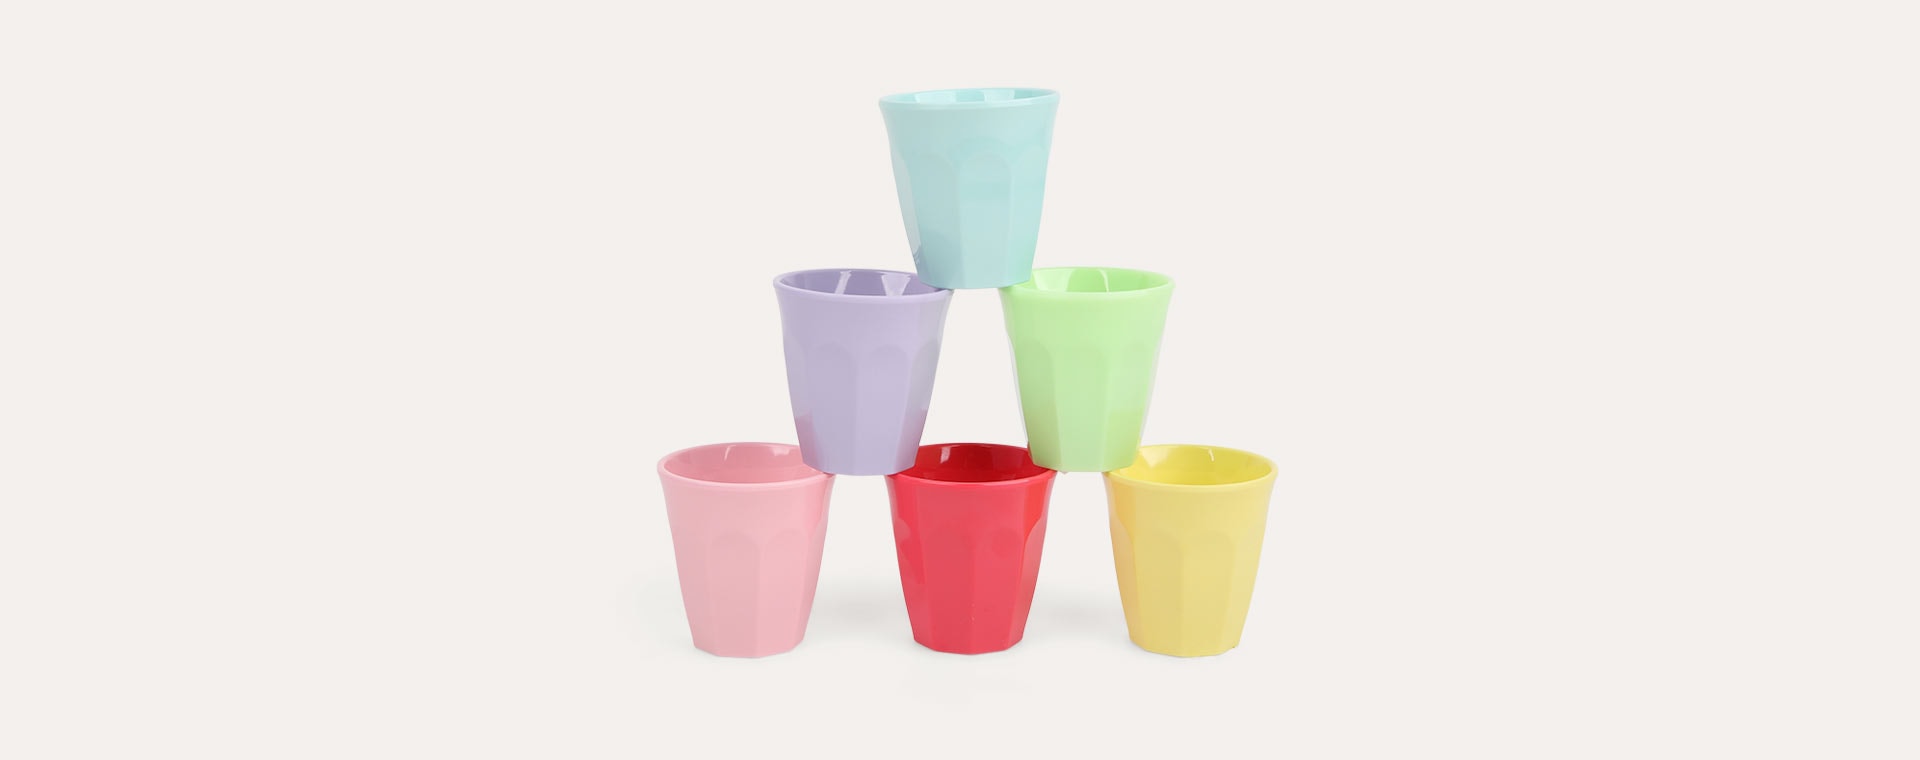 Yippie Yippie Yeah Rice 6-Pack Small Melamine Cups